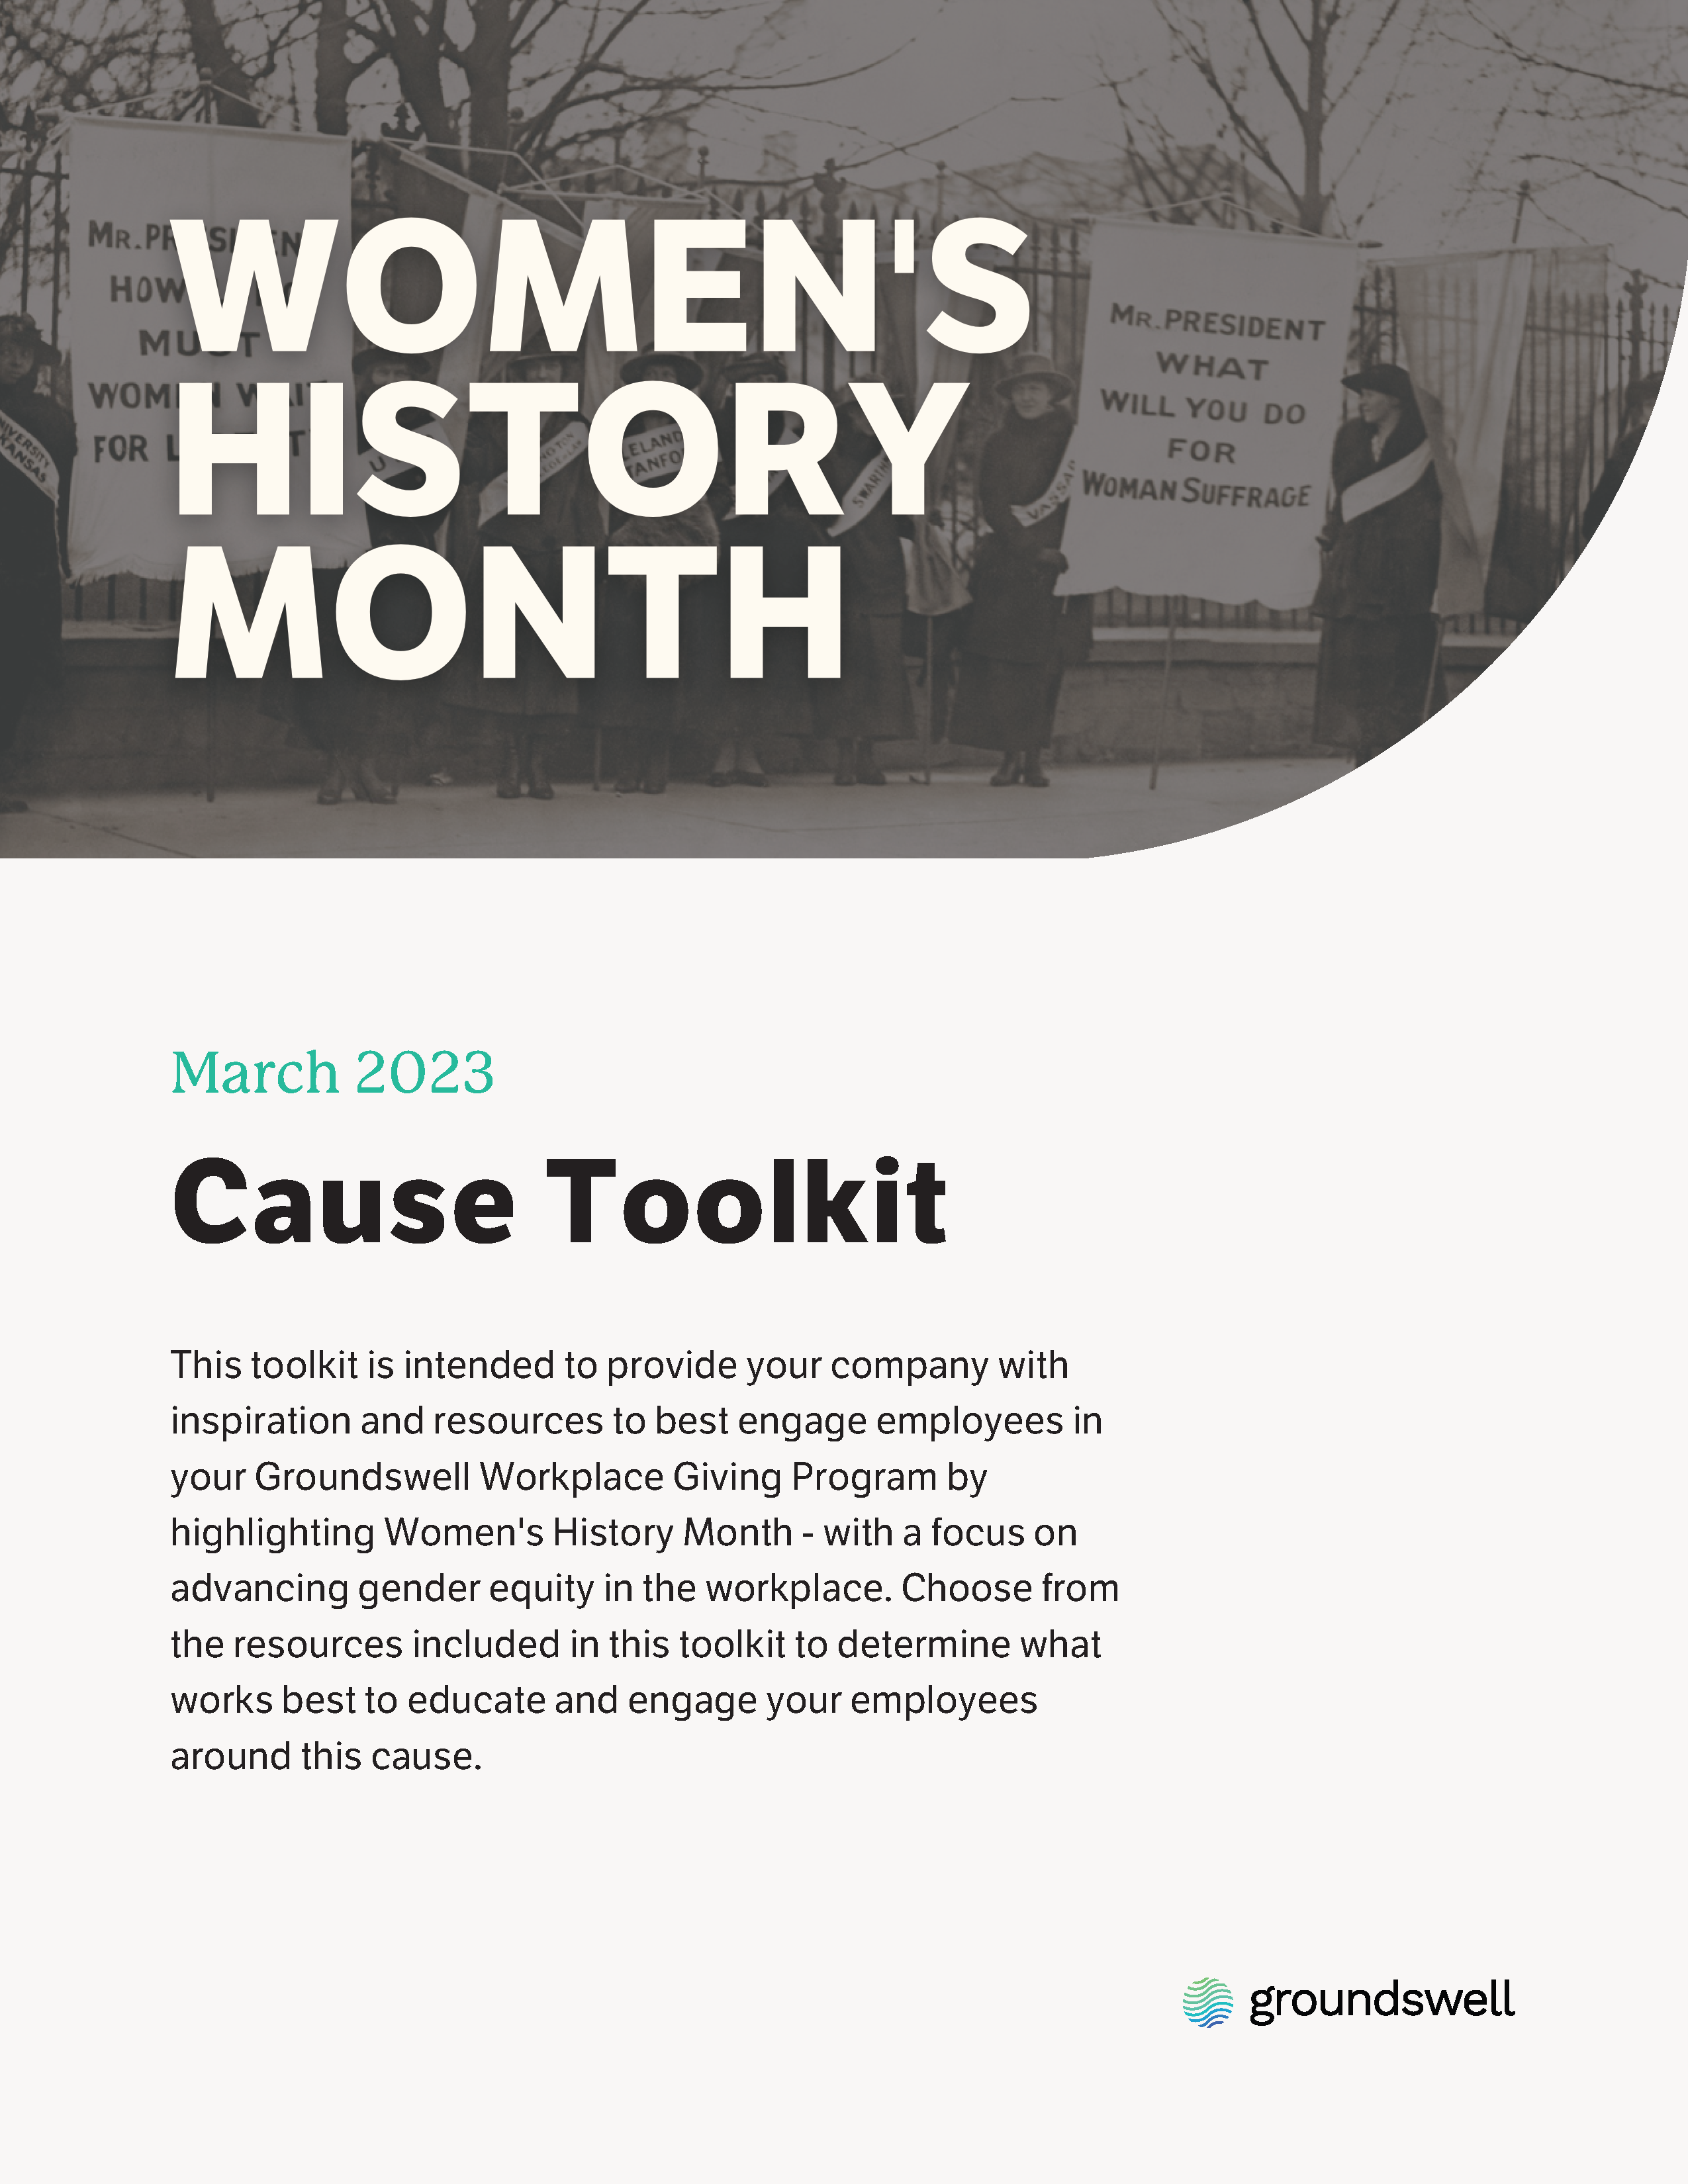 Mar 2023_Womens History Month_Toolkit_Page_1.png